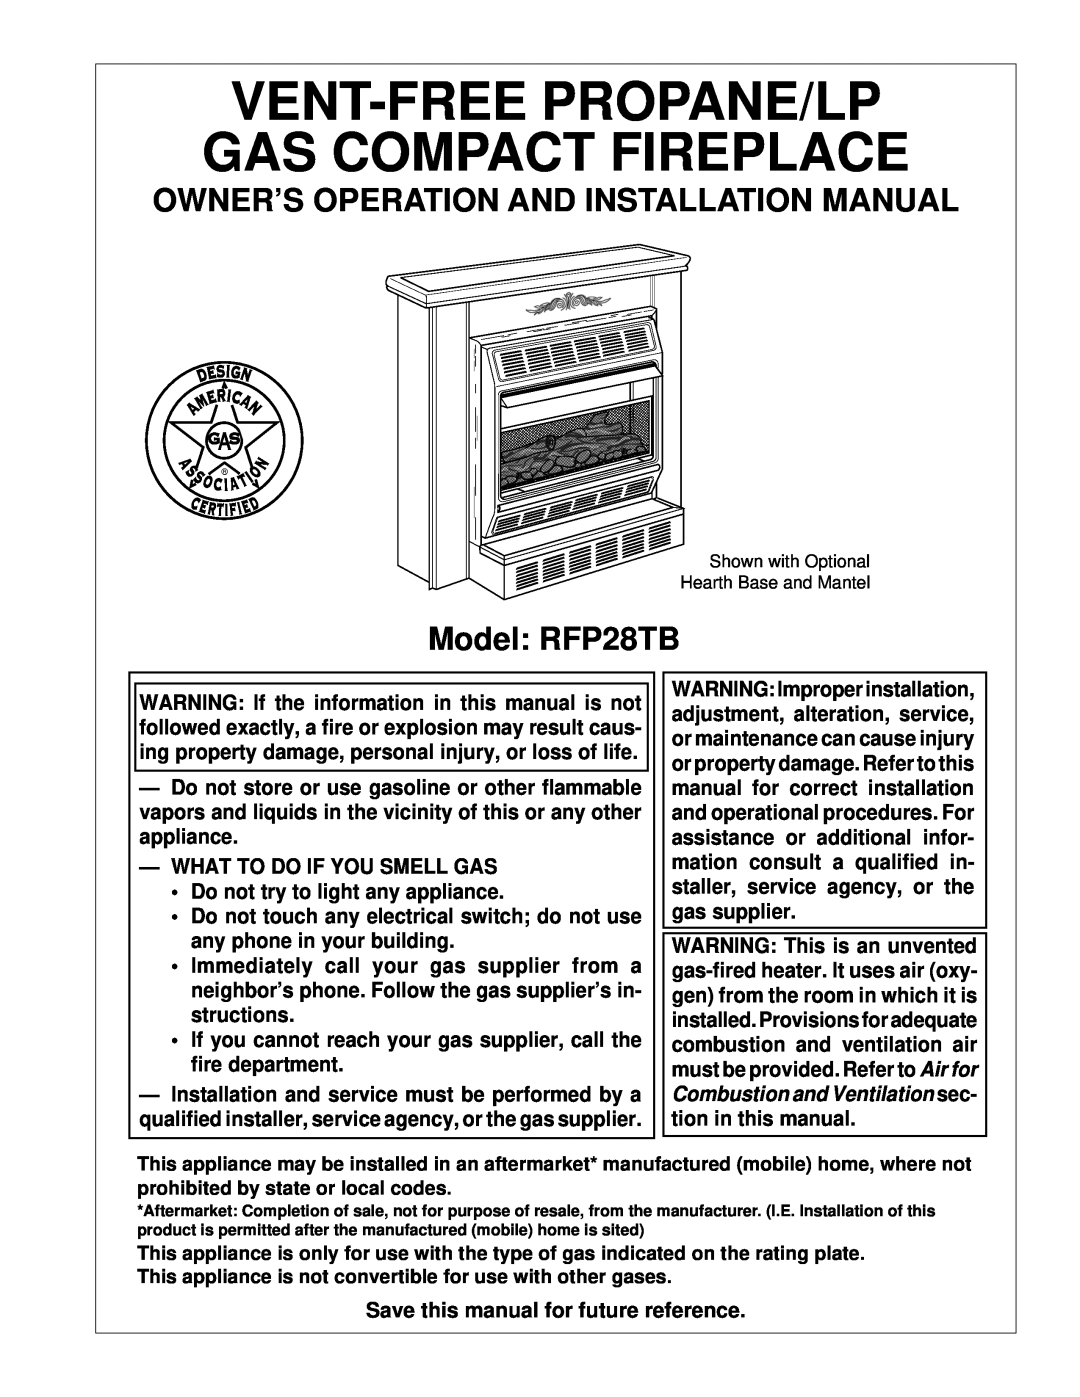 Desa RFP28TB installation manual Vent-Free Propane/Lp Gas Compact Fireplace, Owner’S Operation And Installation Manual 